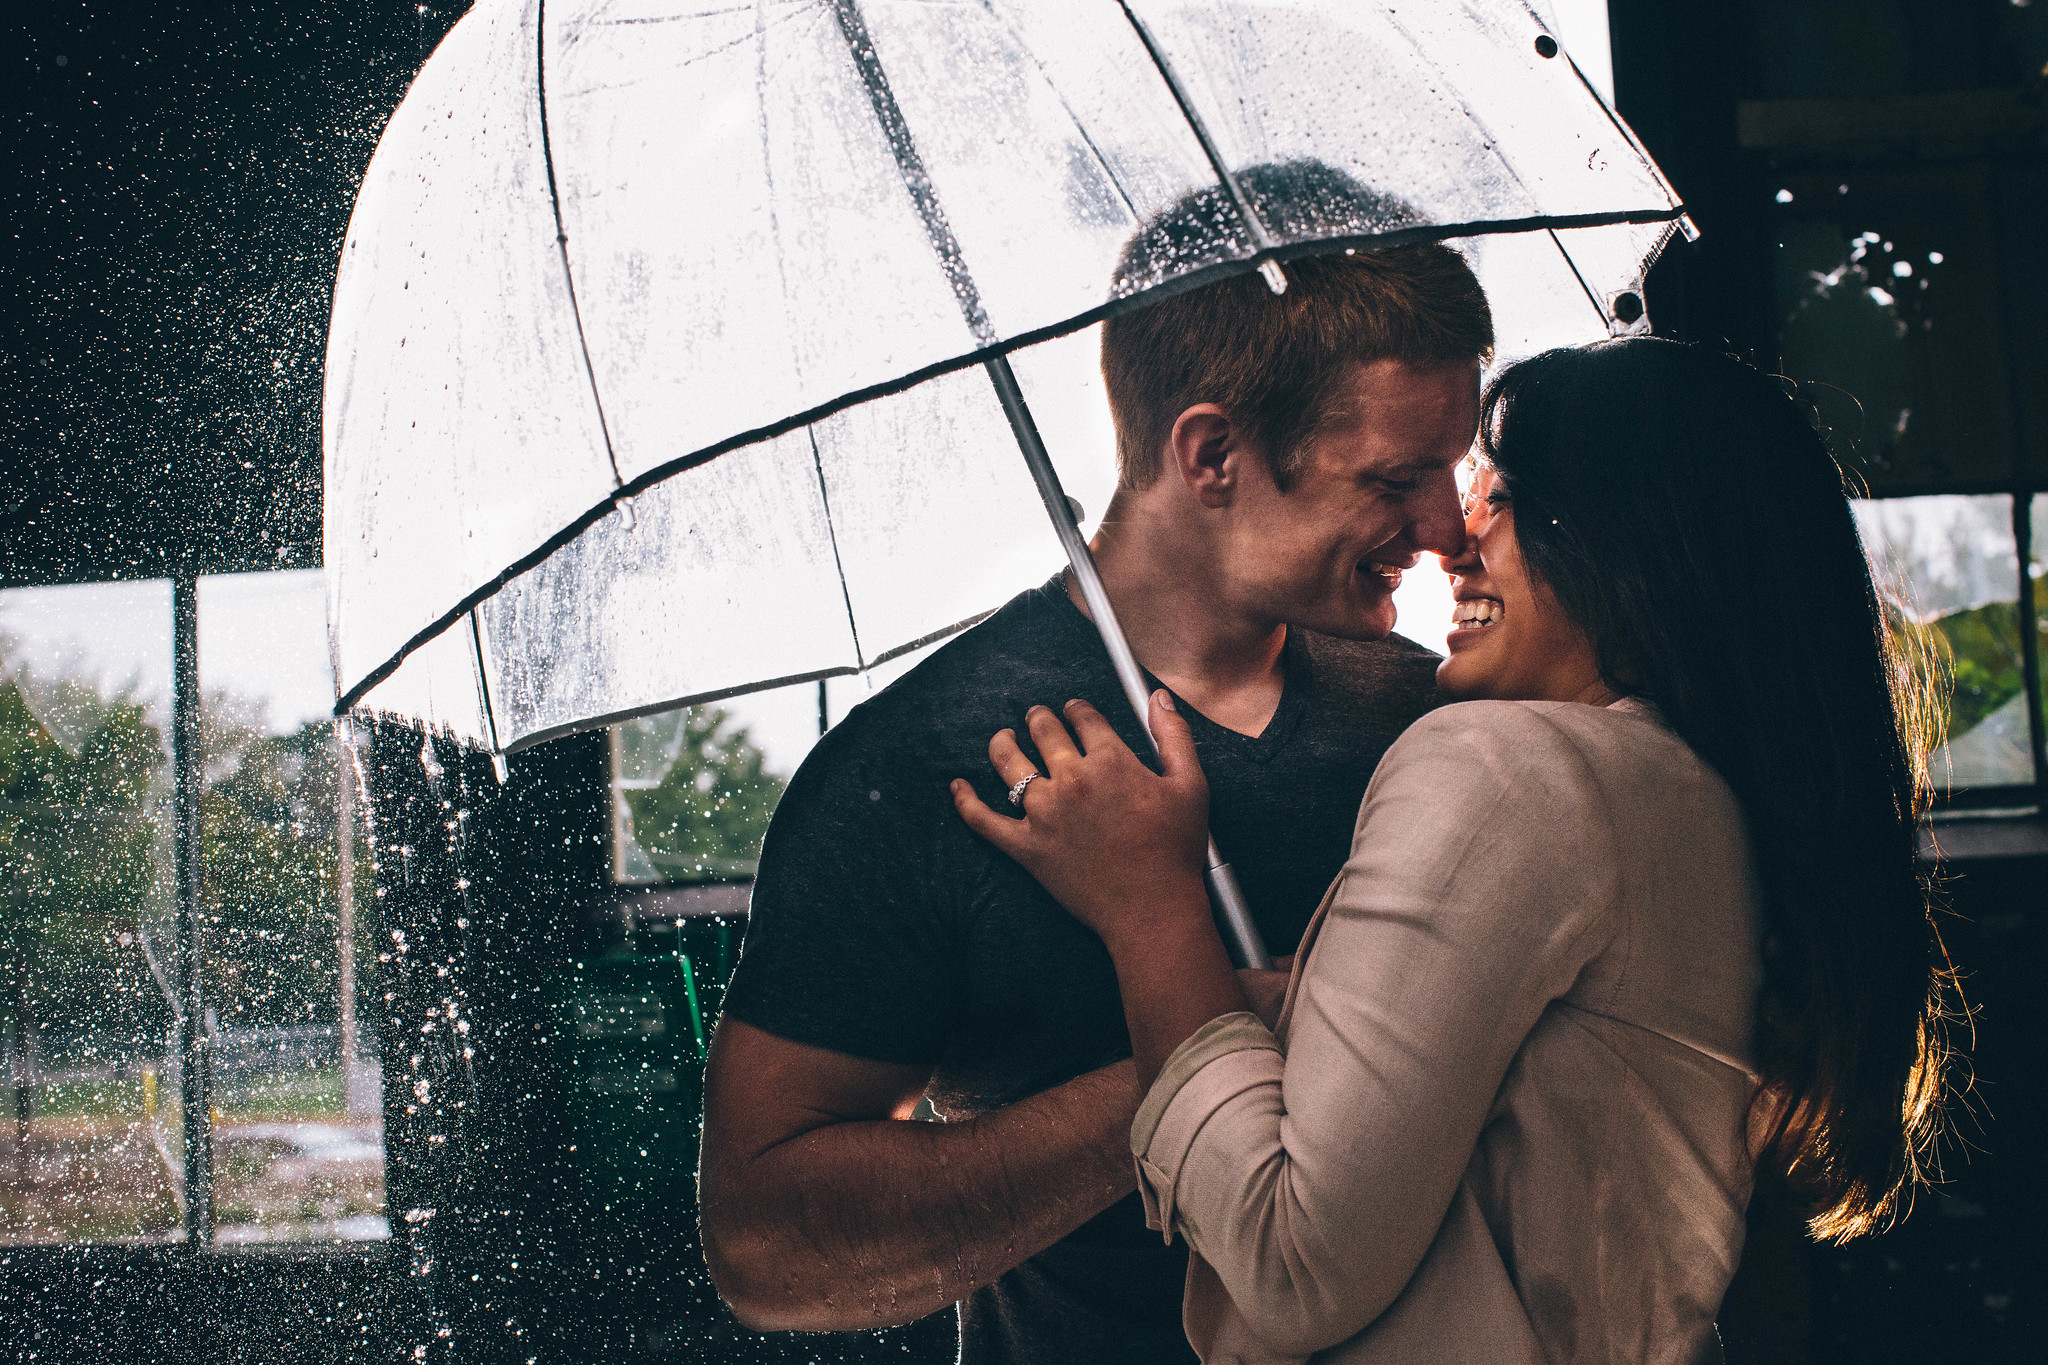 50 Dancing In The Rain Quotes About Love, Romance & More